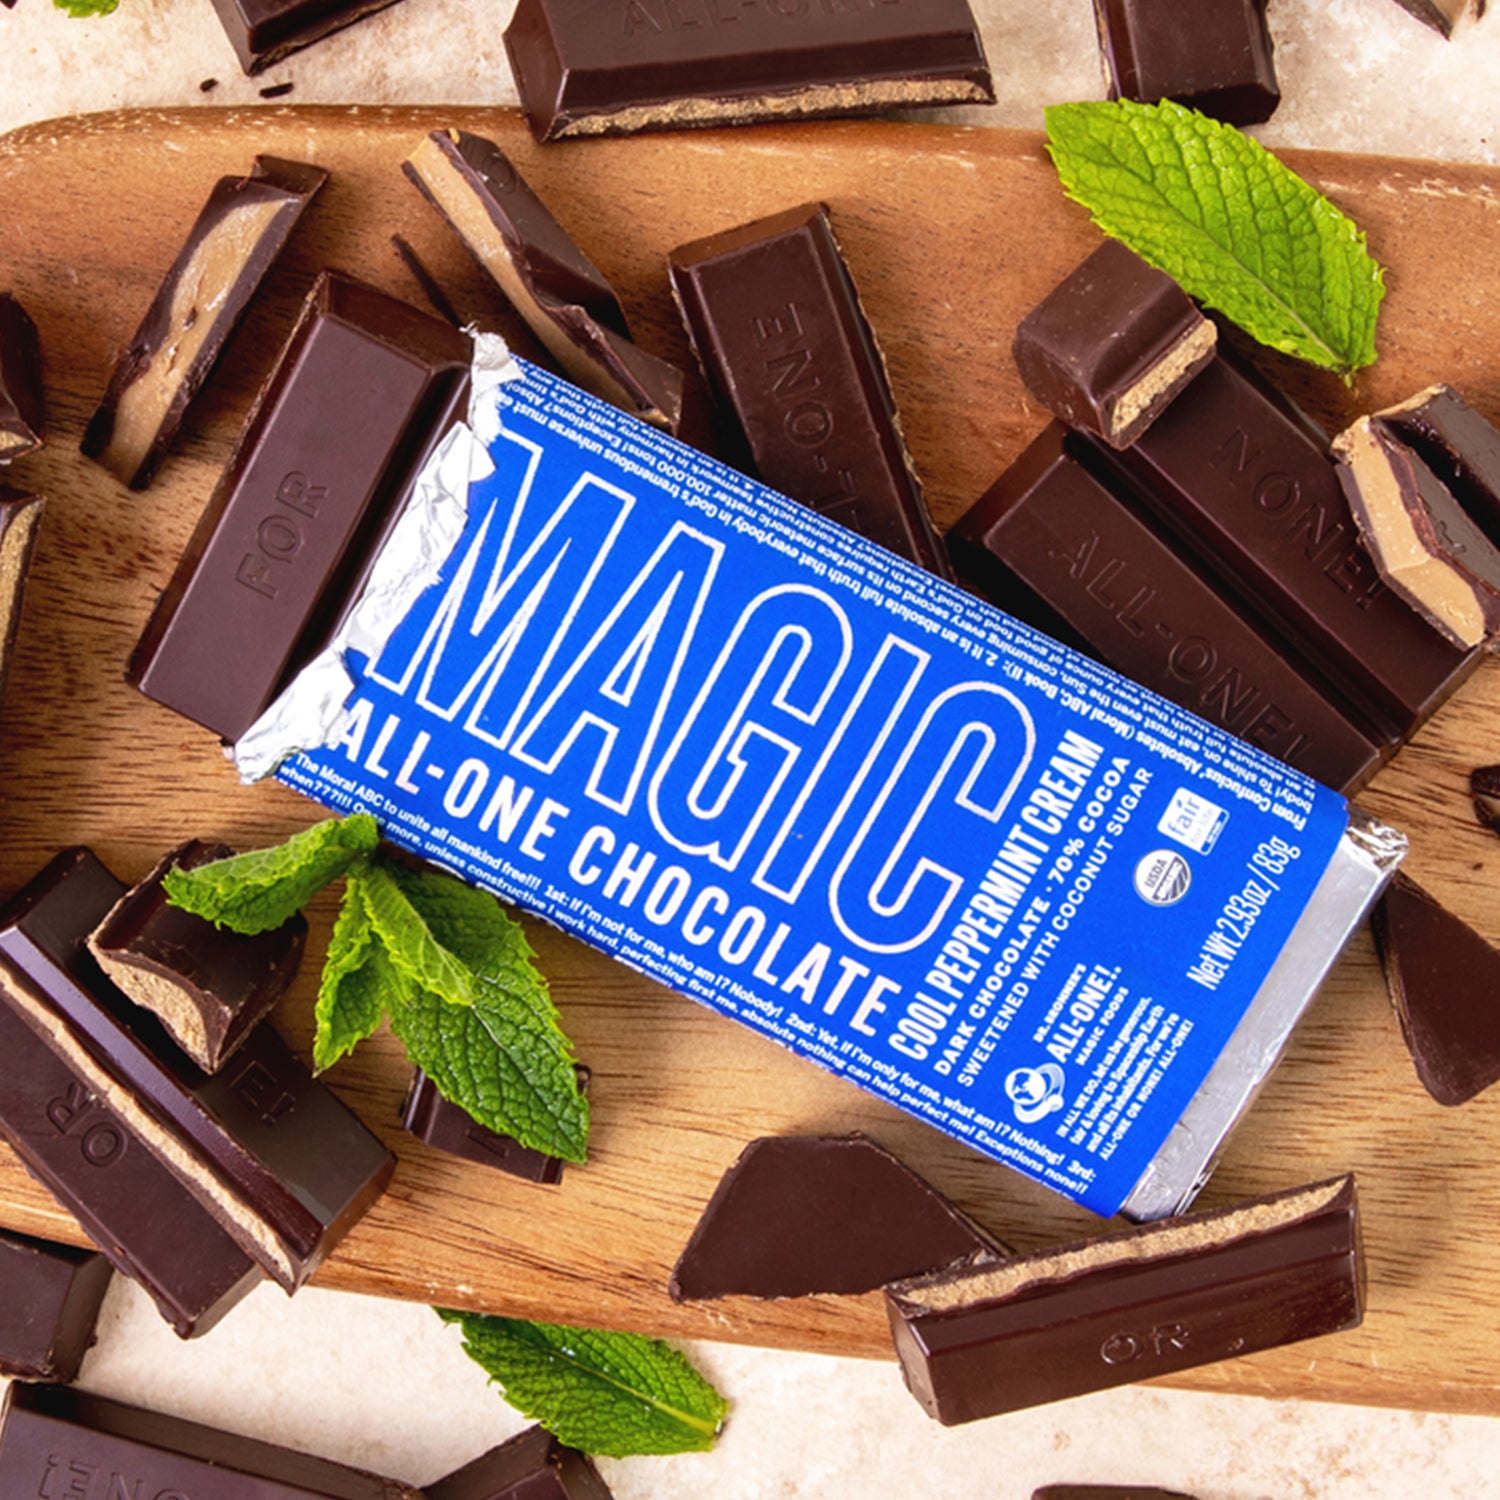 Dr. Bronner's Magic All-One Chocolate - Cool Peppermint Cream